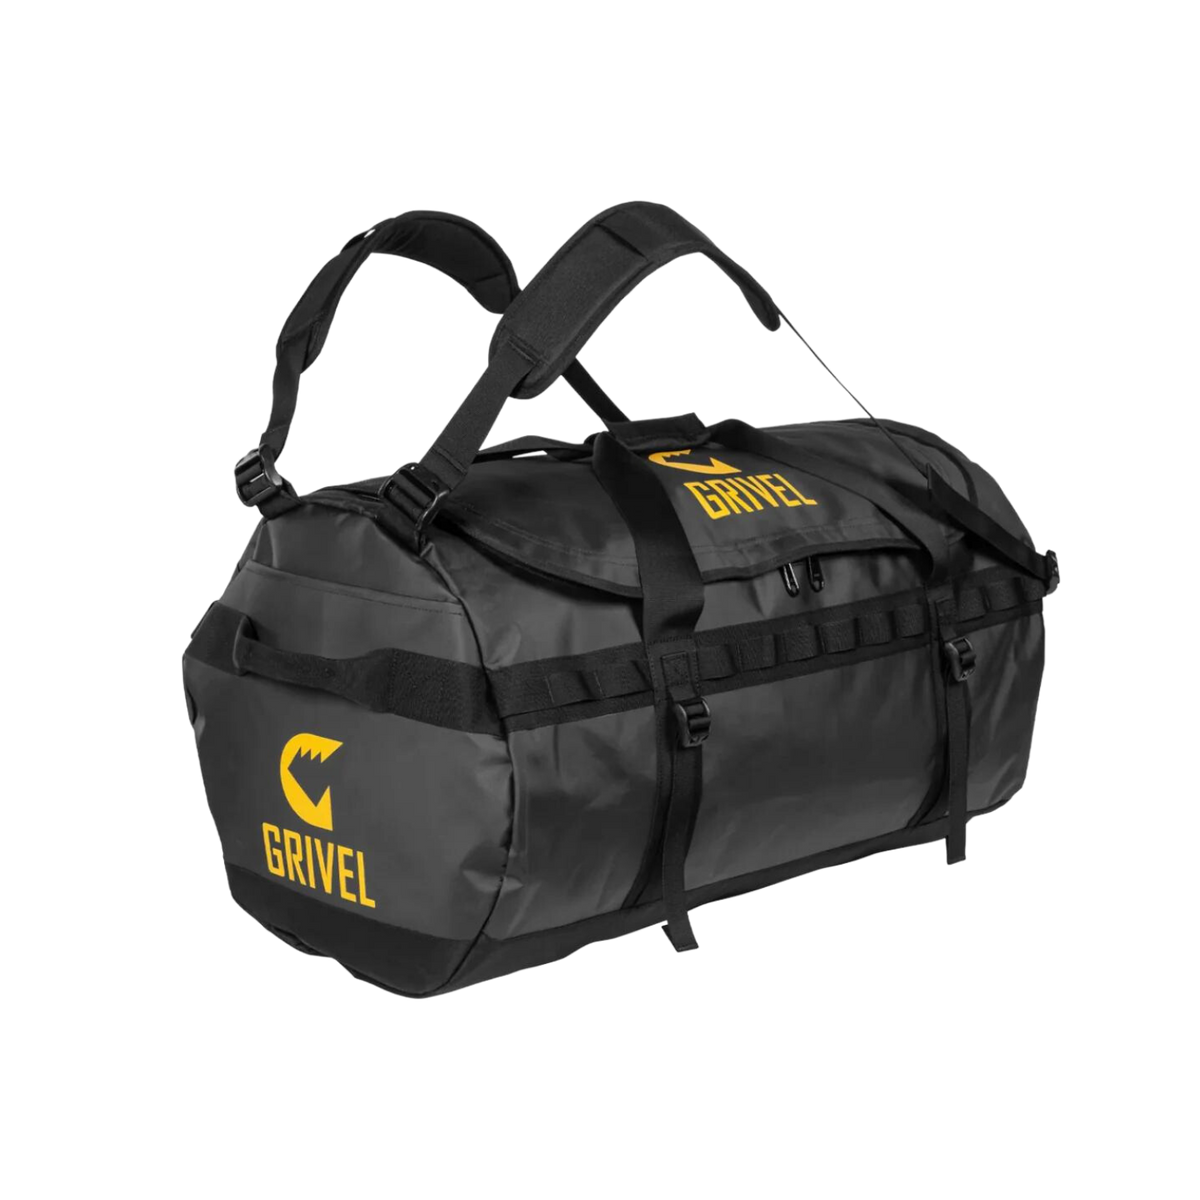 Grivel Expedition Duffel 90L